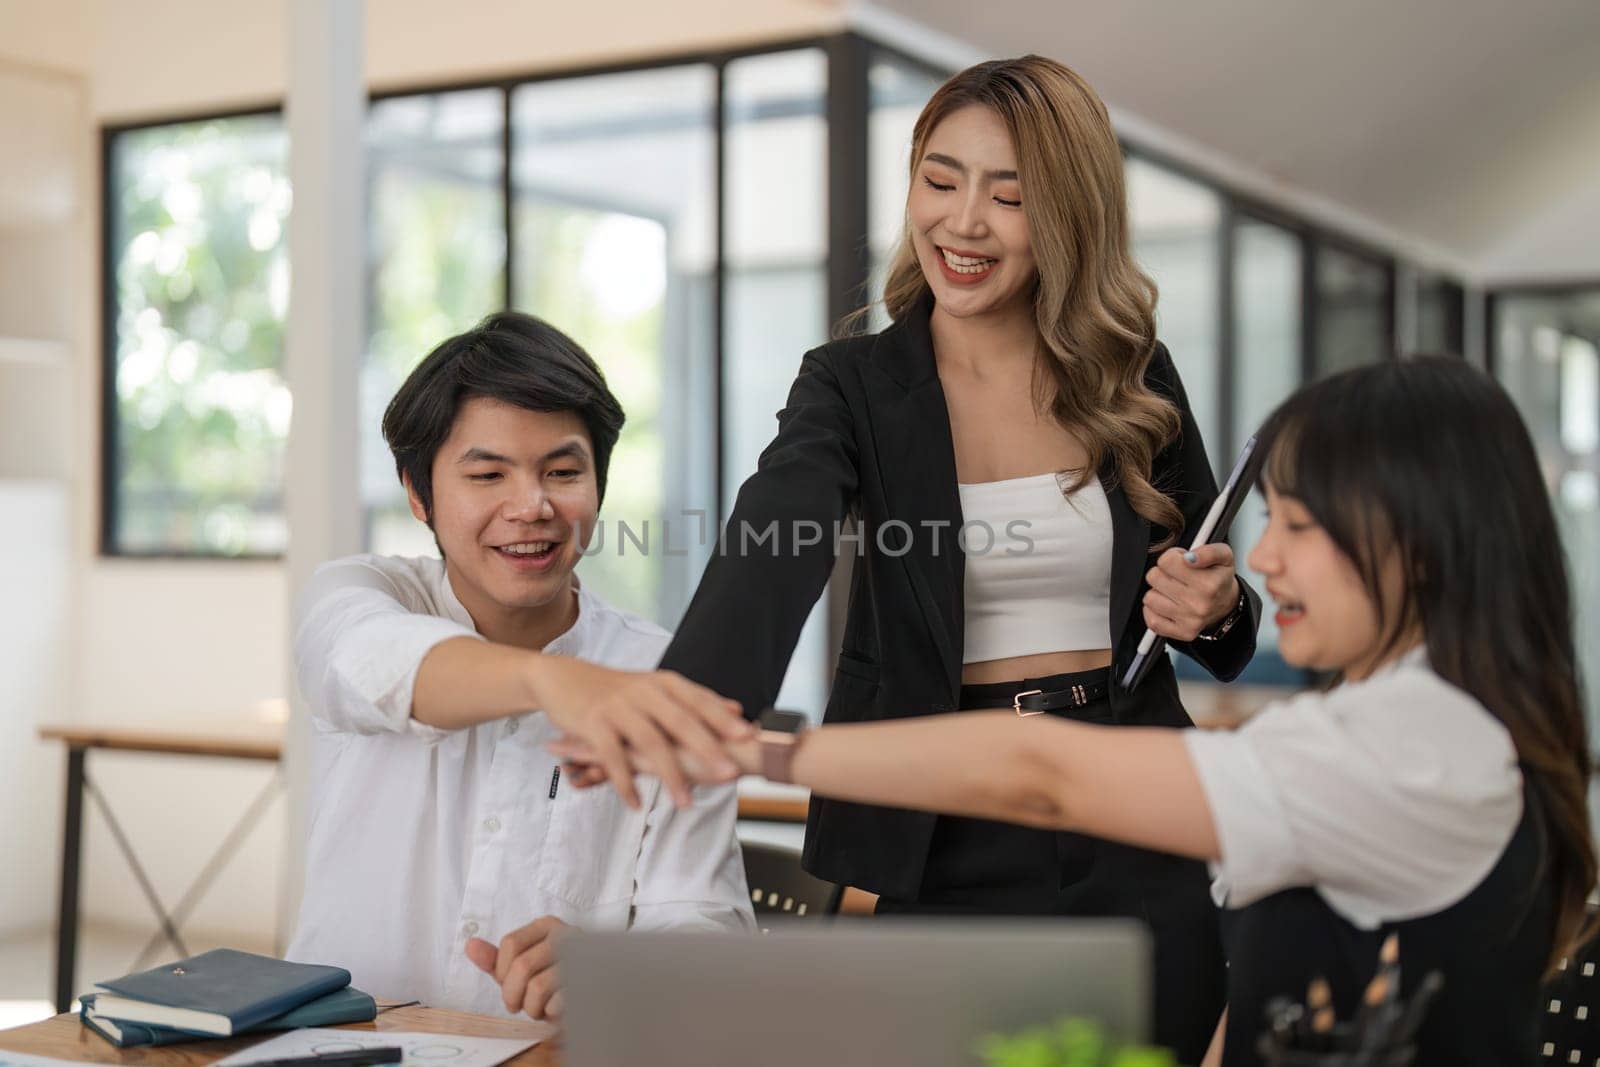 Business people stack touch arms palms together celebrating promotion reward, succeed common aim. Give high five symbol of unity, team building activity concept.